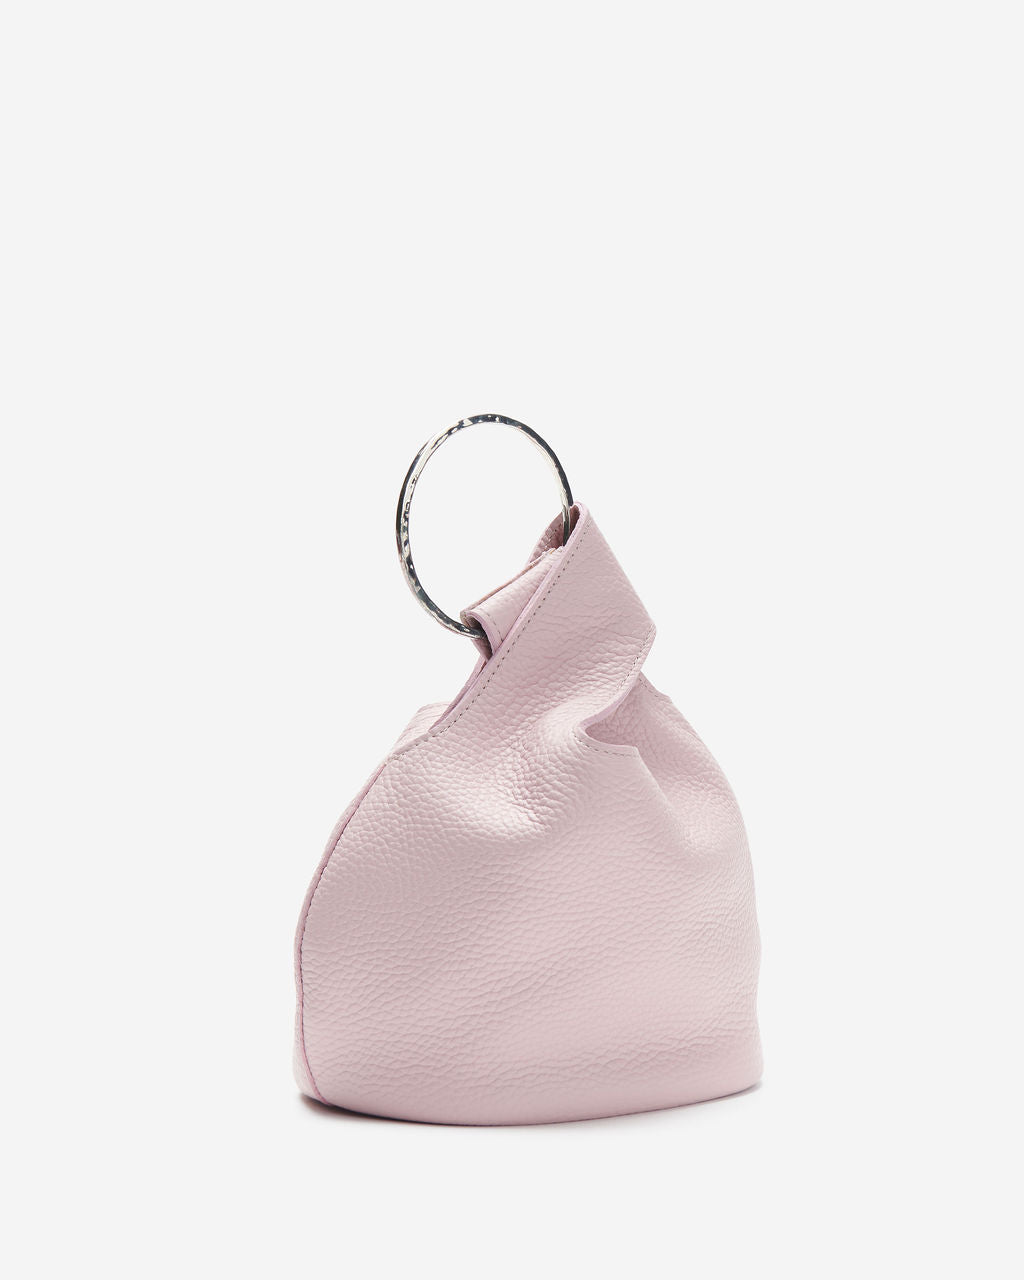 Mitzi Ring Clutch - Pale Pink  Joey James, The Label   